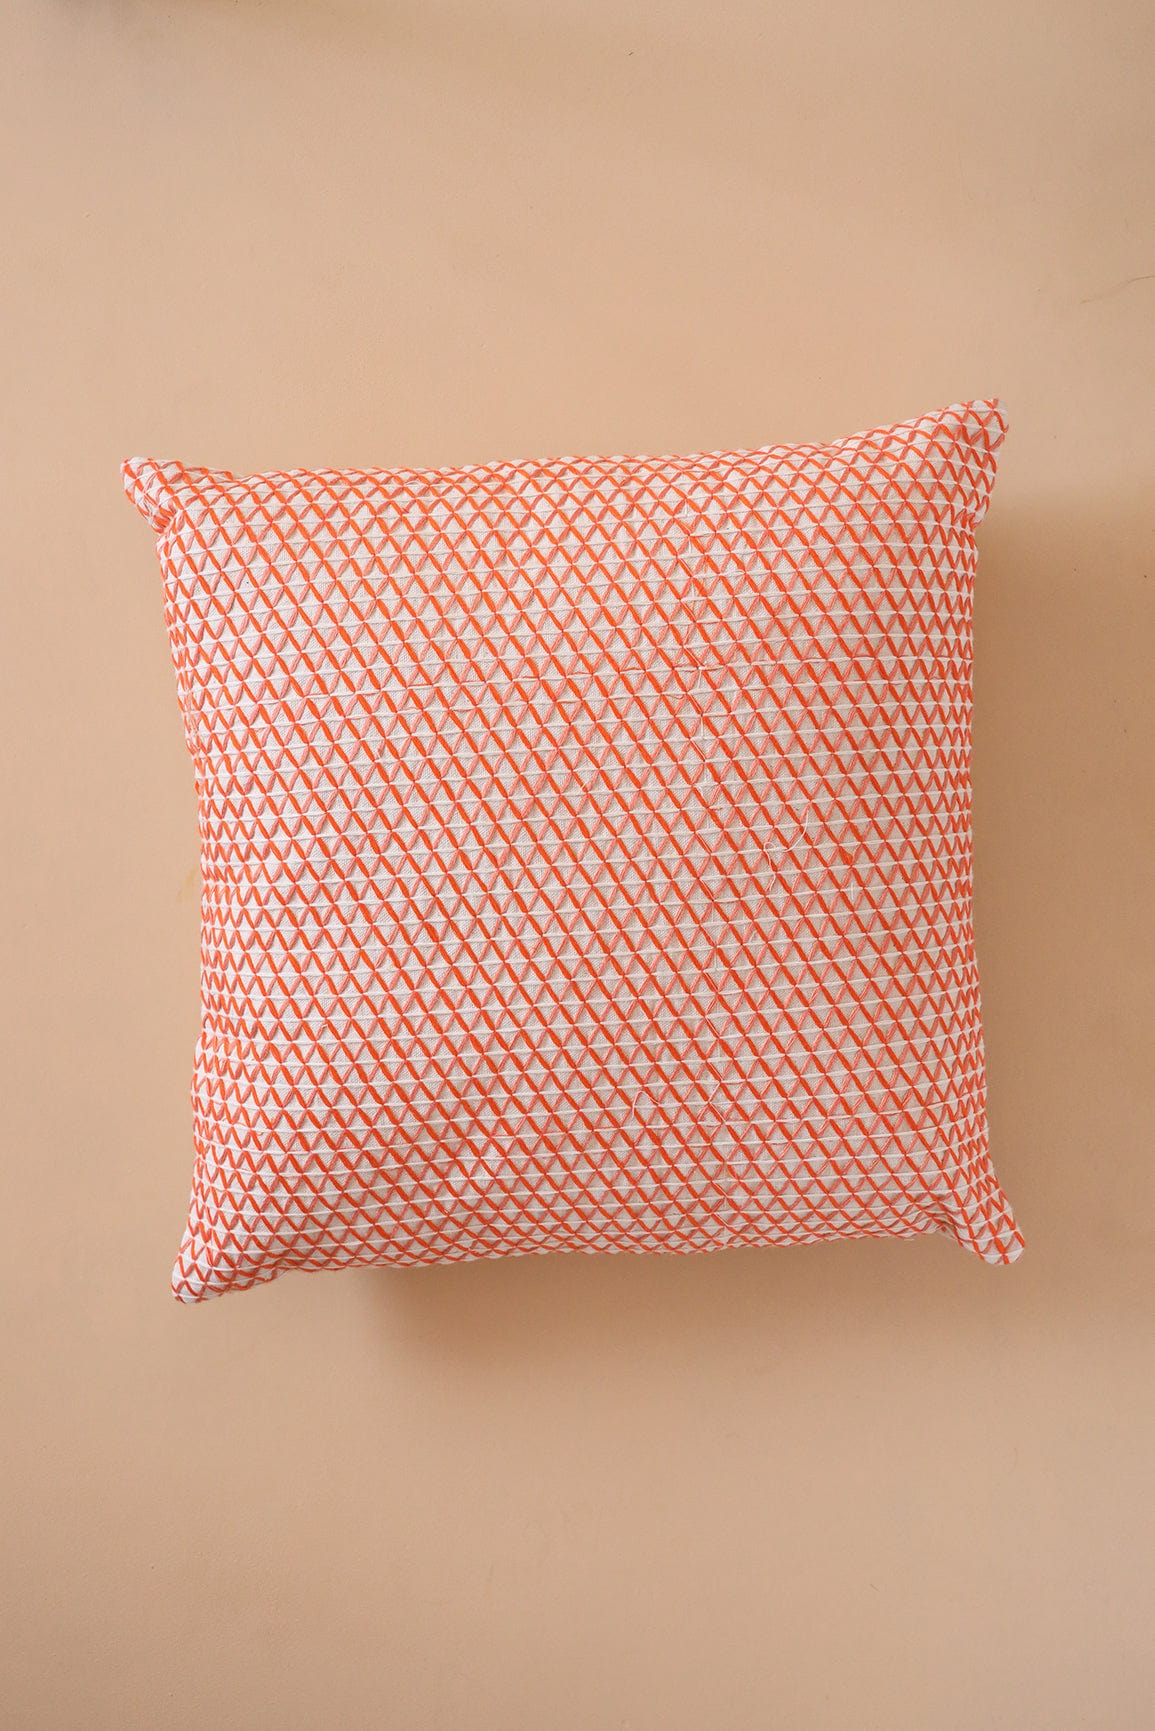 doeraa Orange and Peach Embroidery on off white cotton Cushion Cover (16*16 inches)